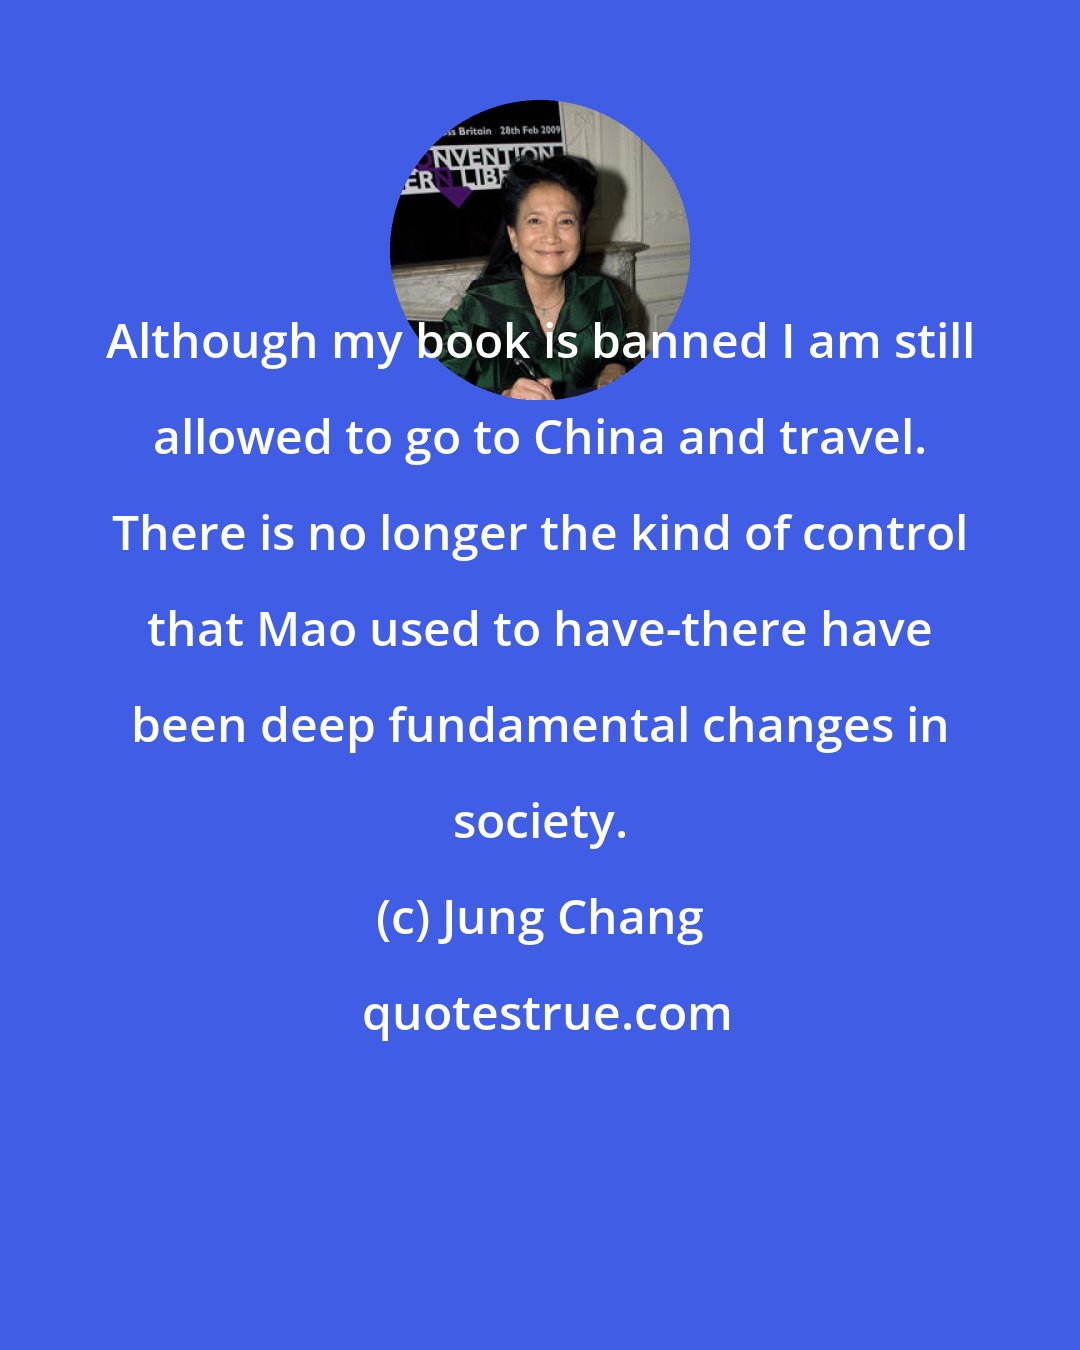 Jung Chang: Although my book is banned I am still allowed to go to China and travel. There is no longer the kind of control that Mao used to have-there have been deep fundamental changes in society.